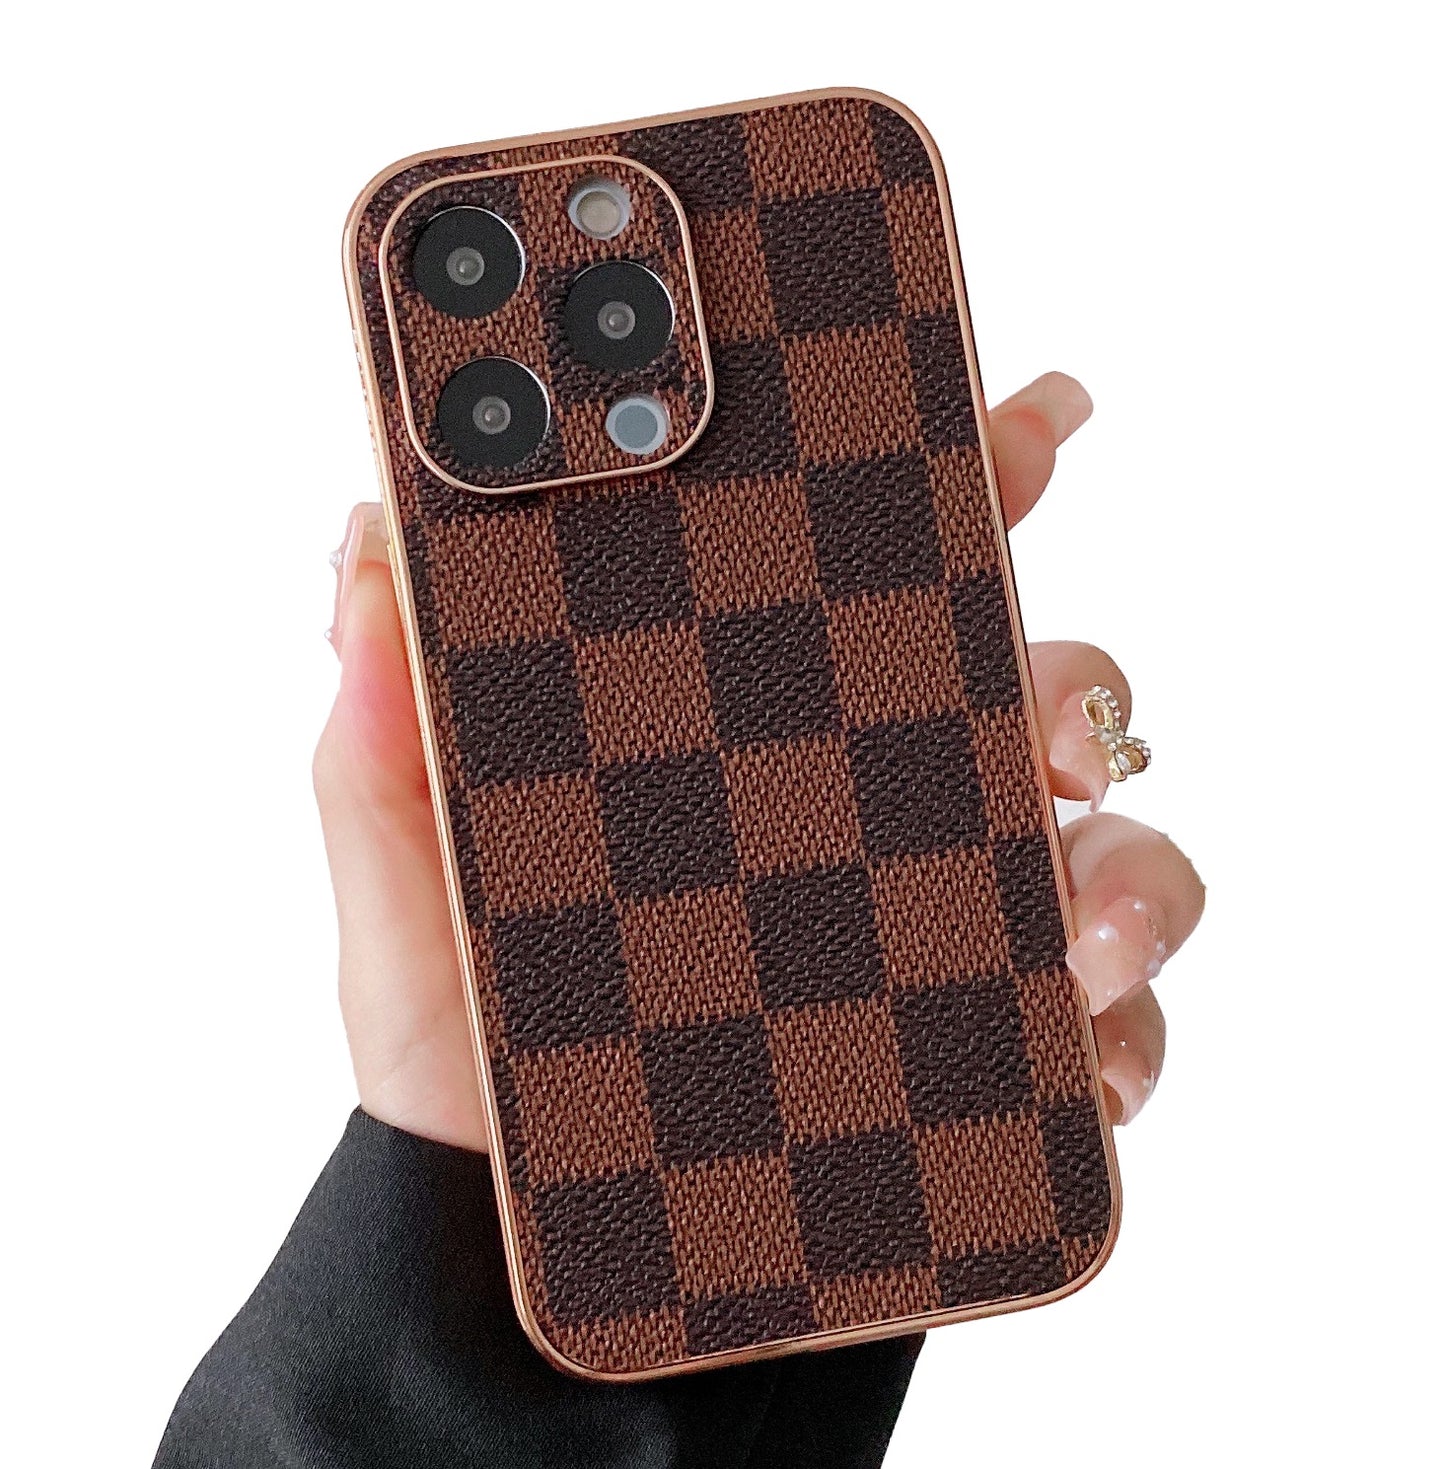 cover louis vuitton iphone 13